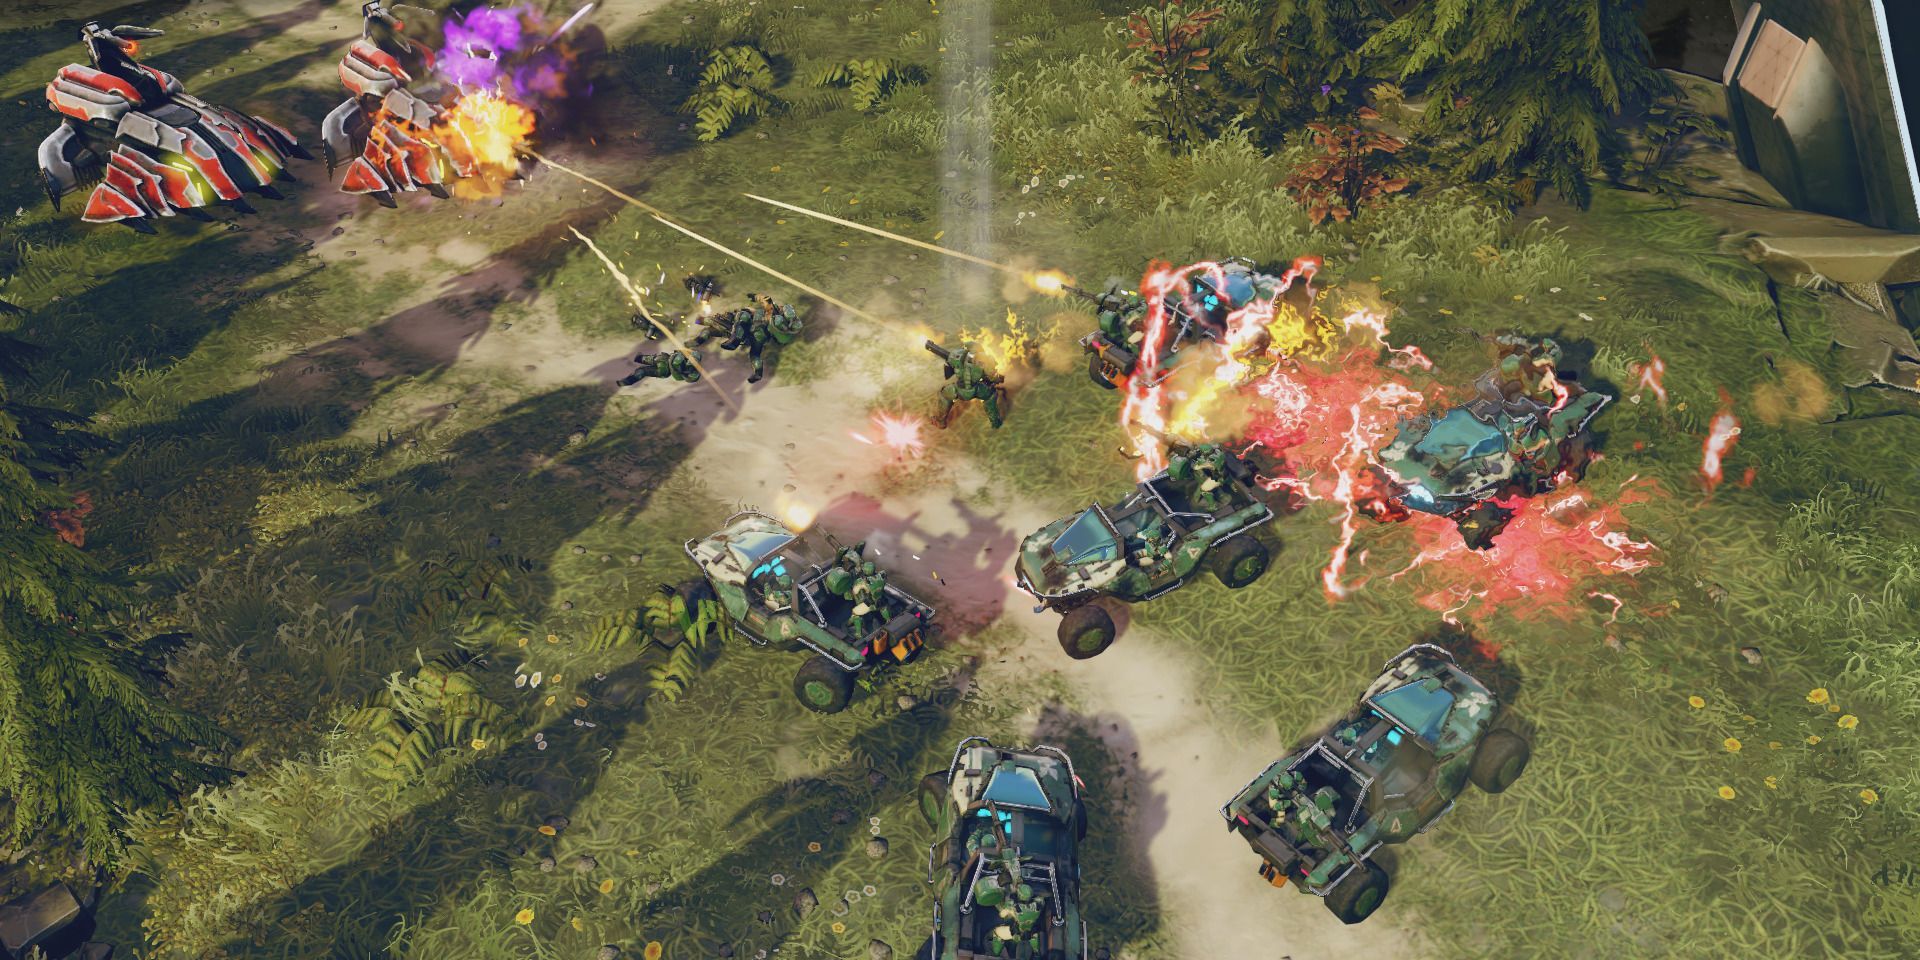 A Warthog and Wraith battle in Halo Wars